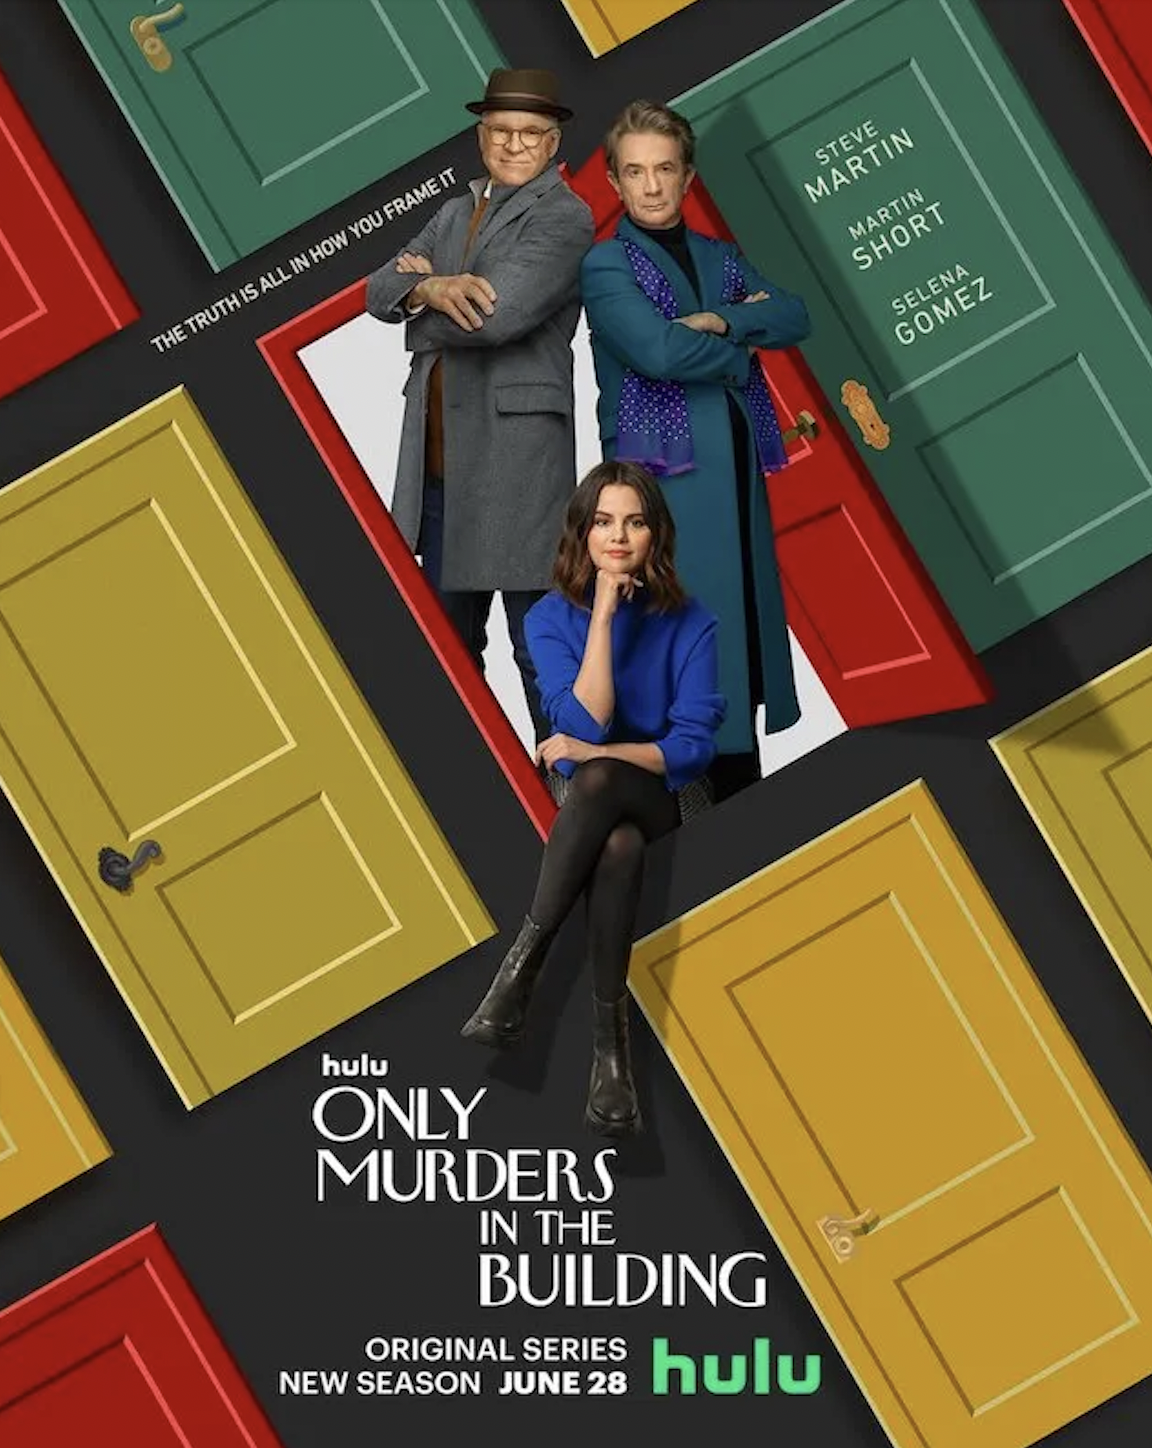 'Only Murders in the Building' on Hulu